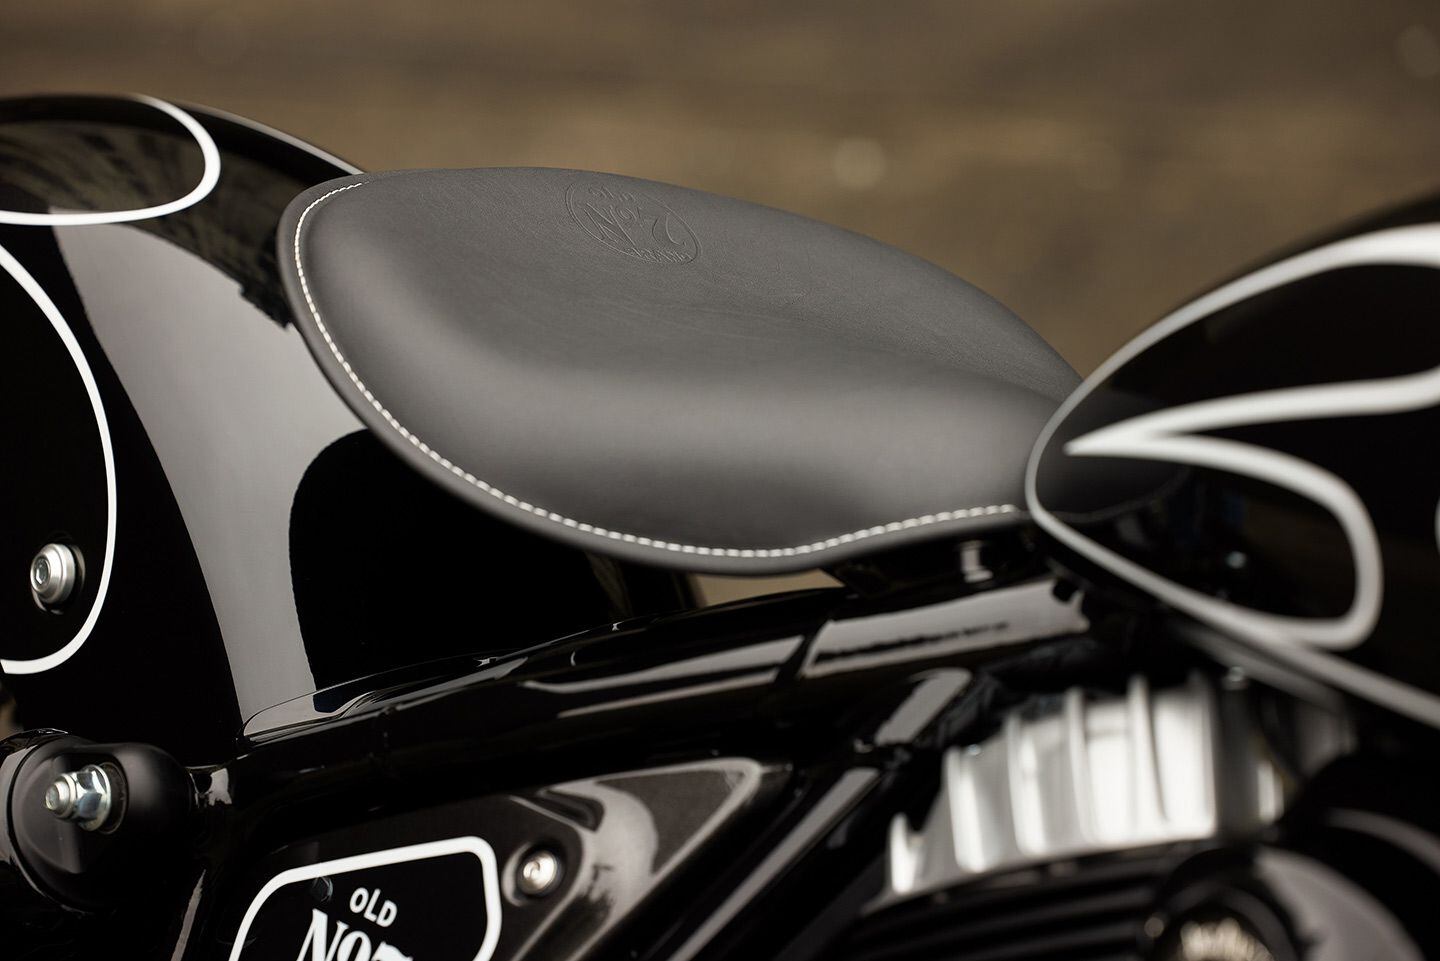 No blank surface goes untouched: Even the saddle gets a stamped logo to indicate special model status.